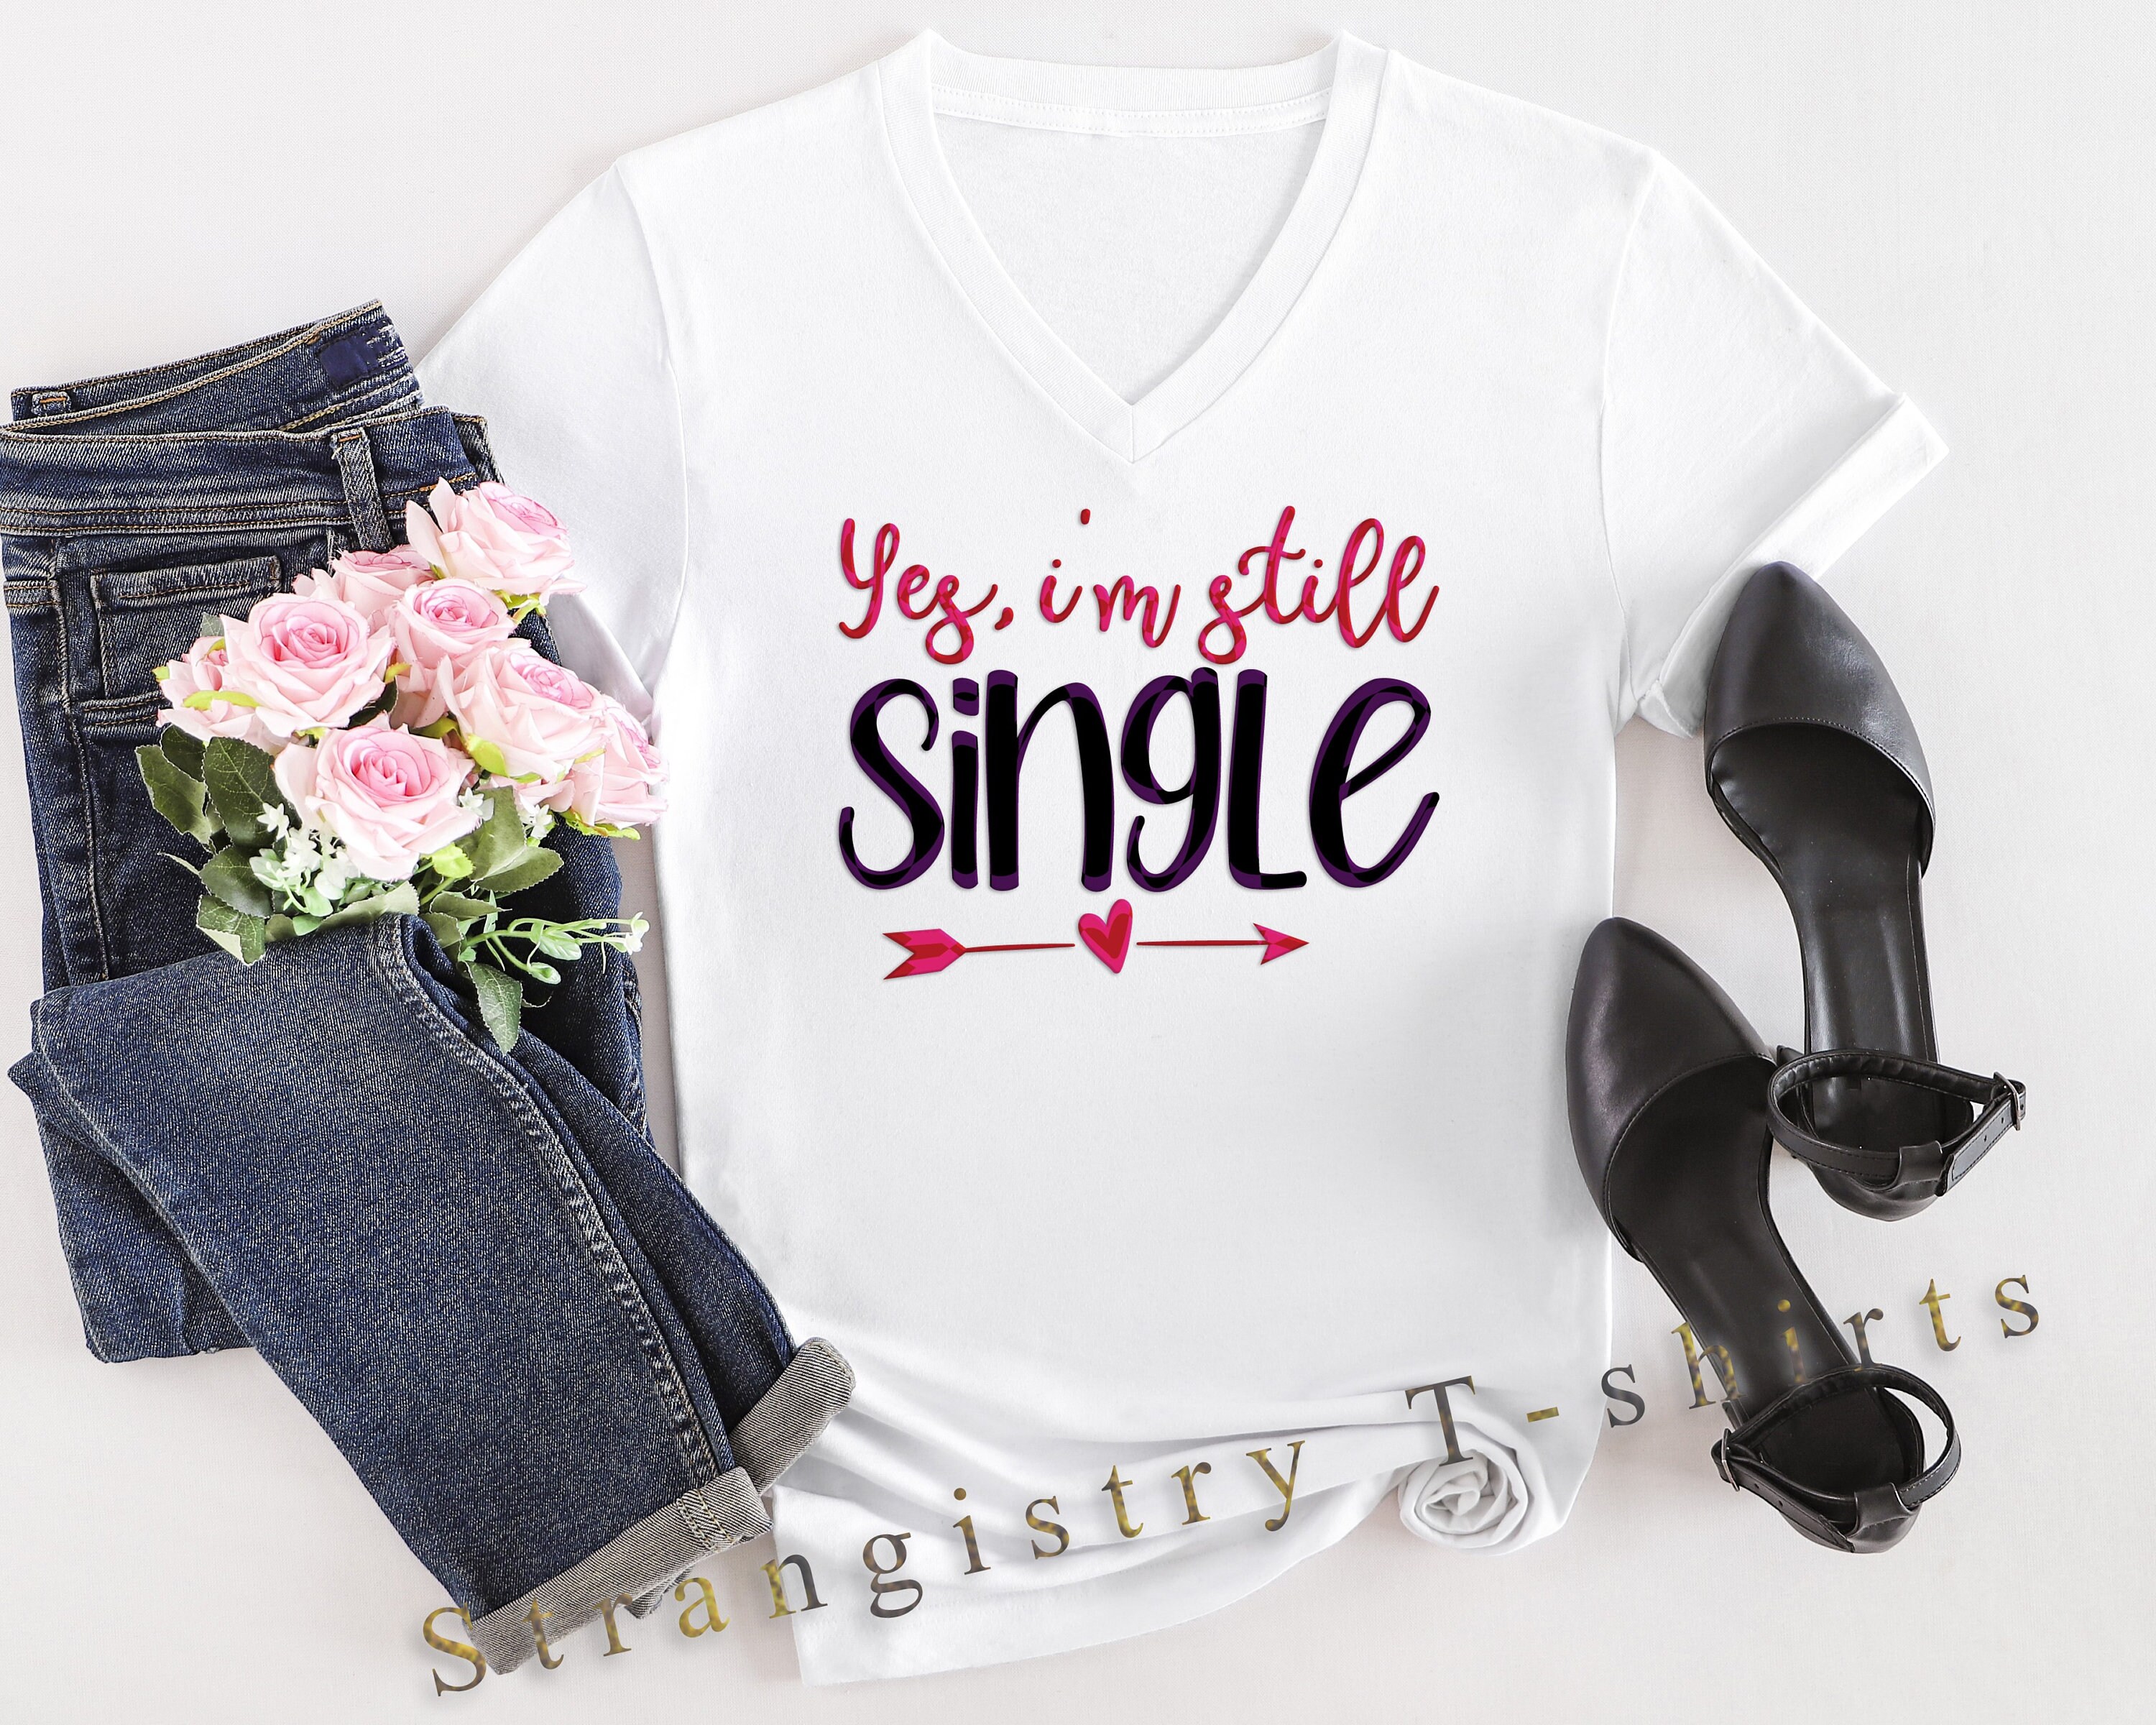 Funny Streetwear Love Custom T-shirt with Text of “Yes I’m Still Single”. Sarcastic Love Shirt for Men and Women. Gift for Crushes.